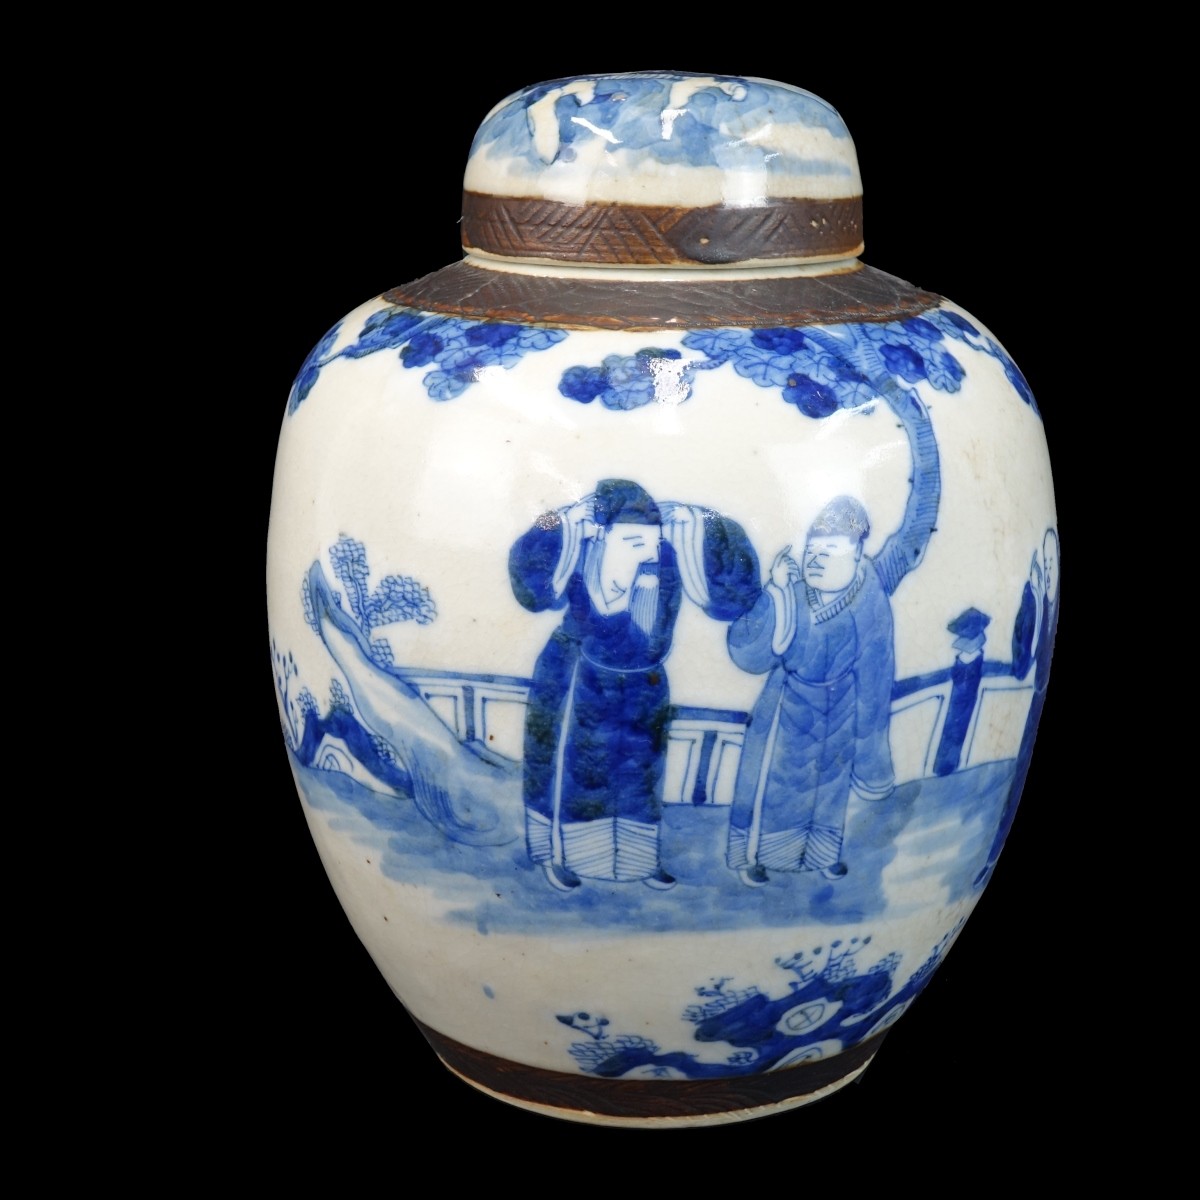 Chinese Blue and White Porcelain Ginger Jar